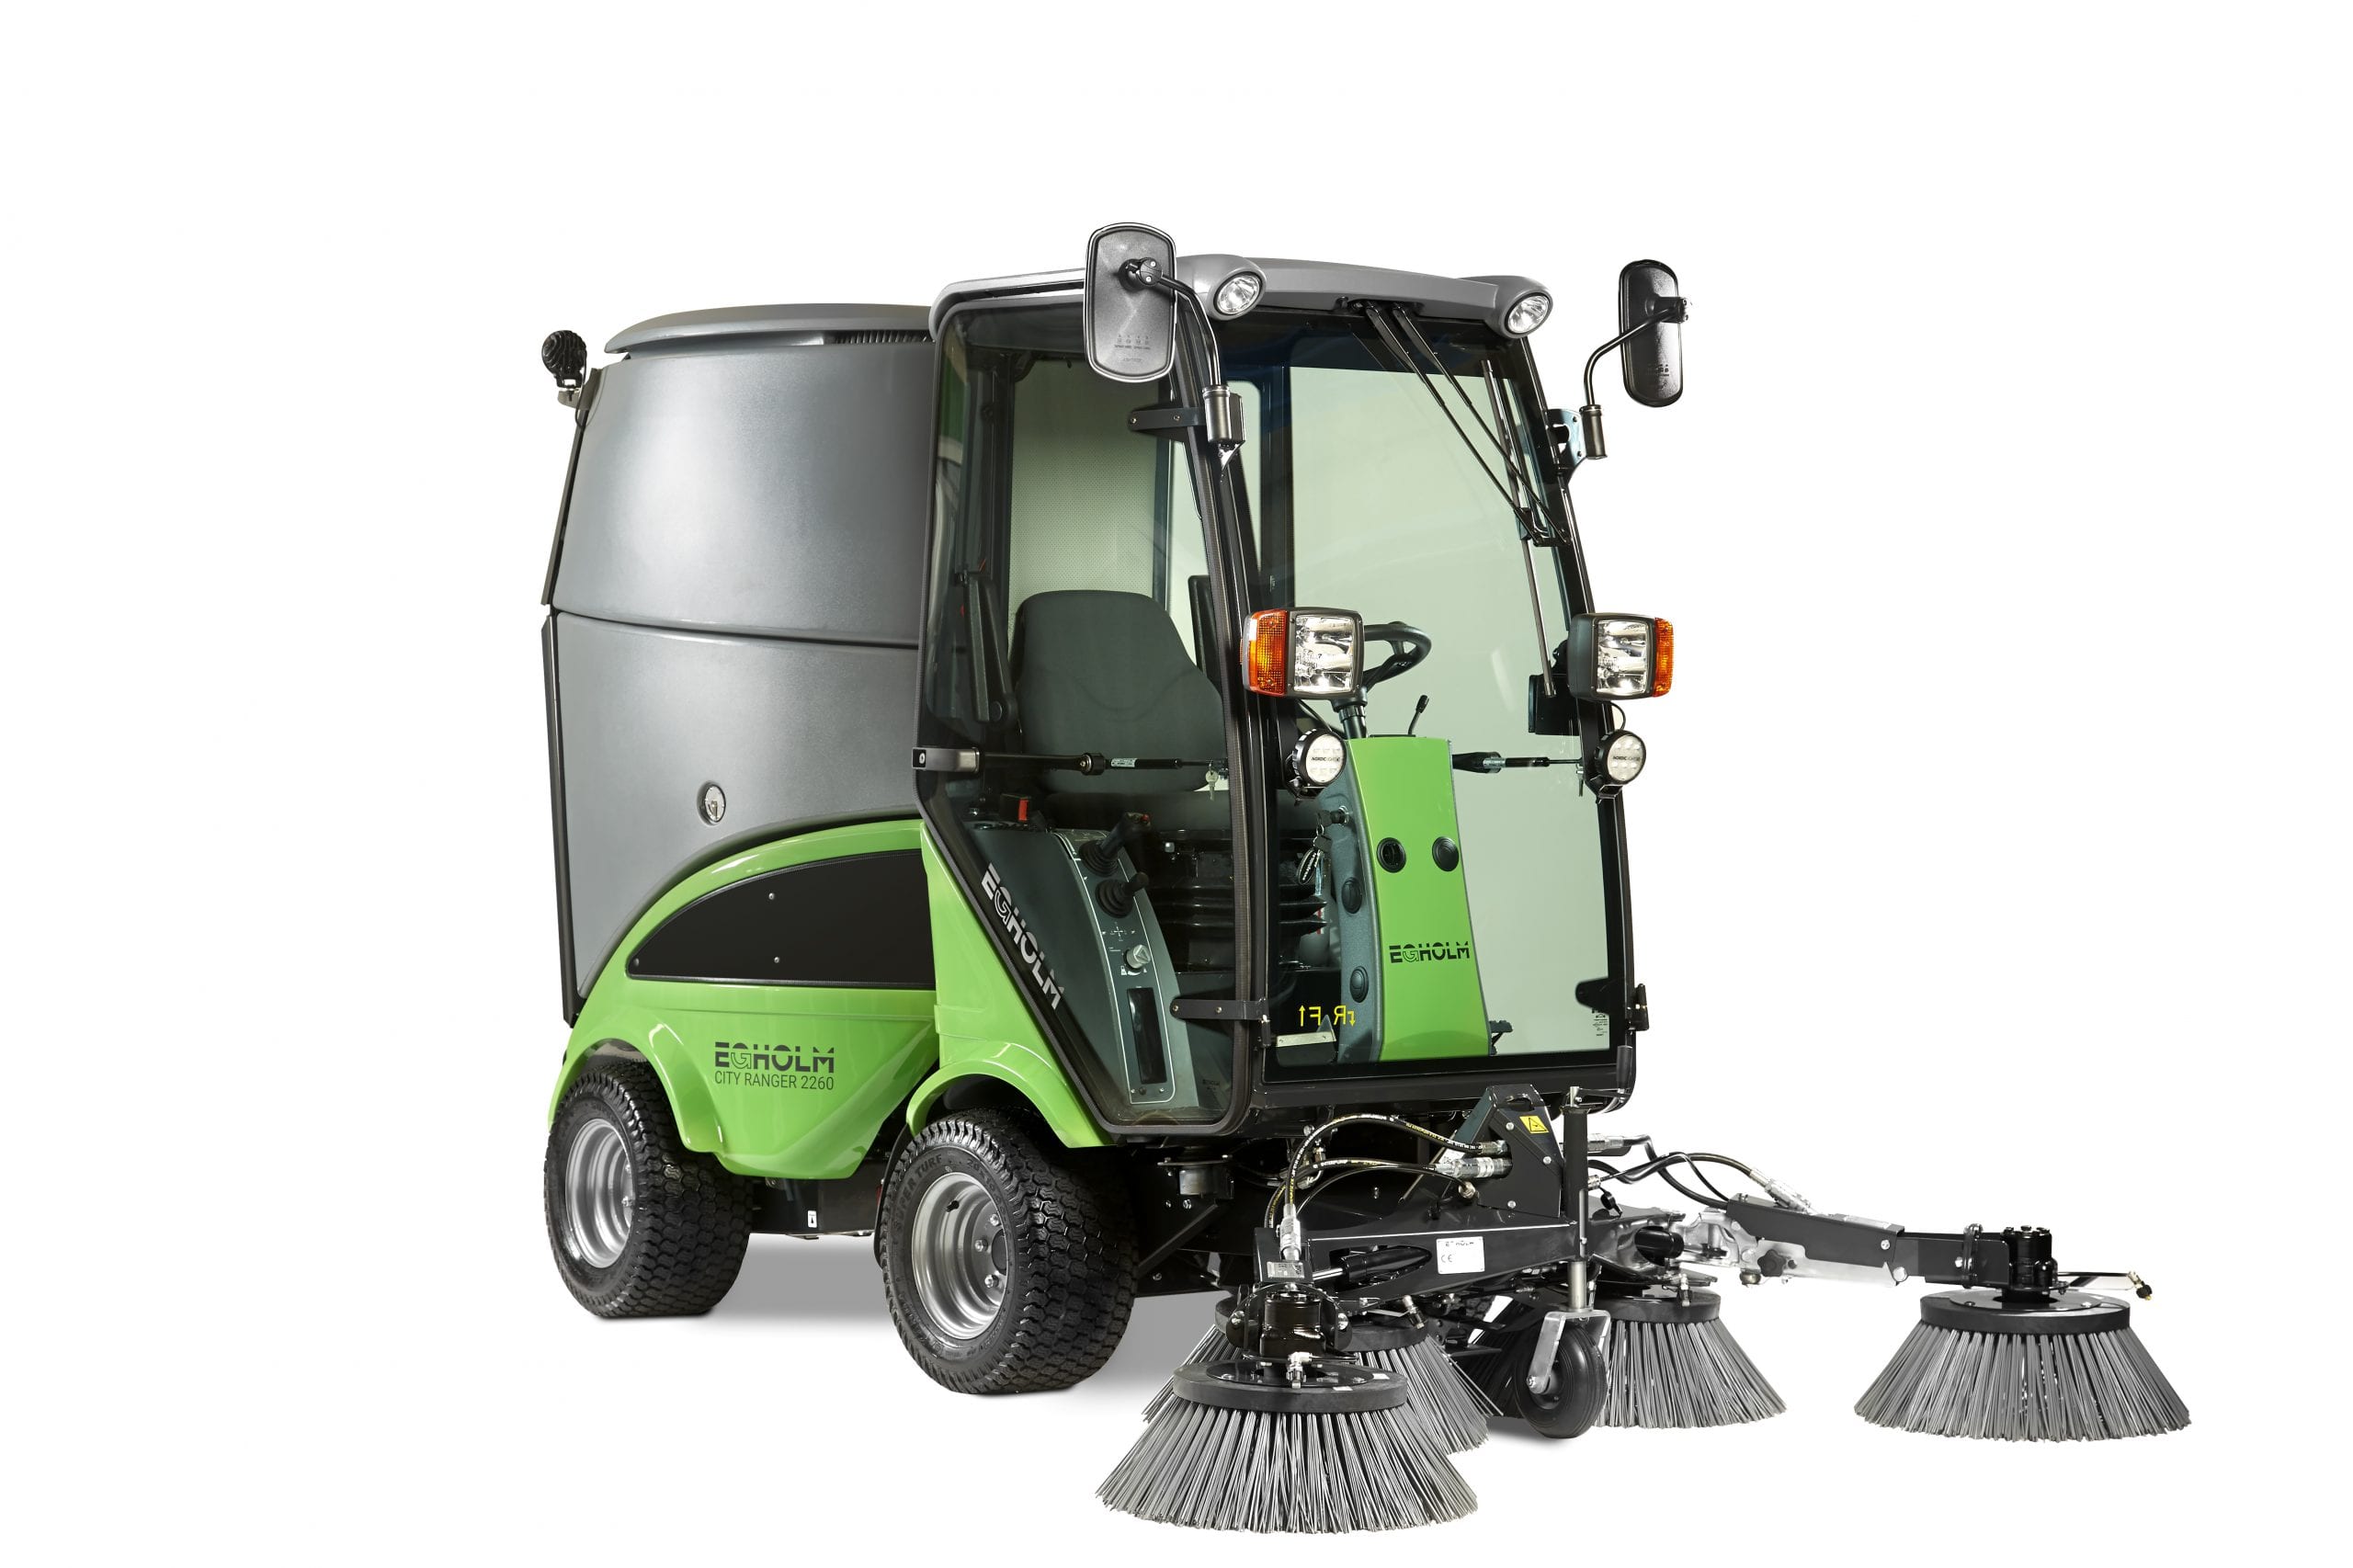 Egholm City Ranger 2260 Outdoor Floor Sweeper for Sale in UK, in areas like Leicester, Northampton, Nottingham, Birmingham, Derby, Warwick, West Midlands and East Midlands(1)